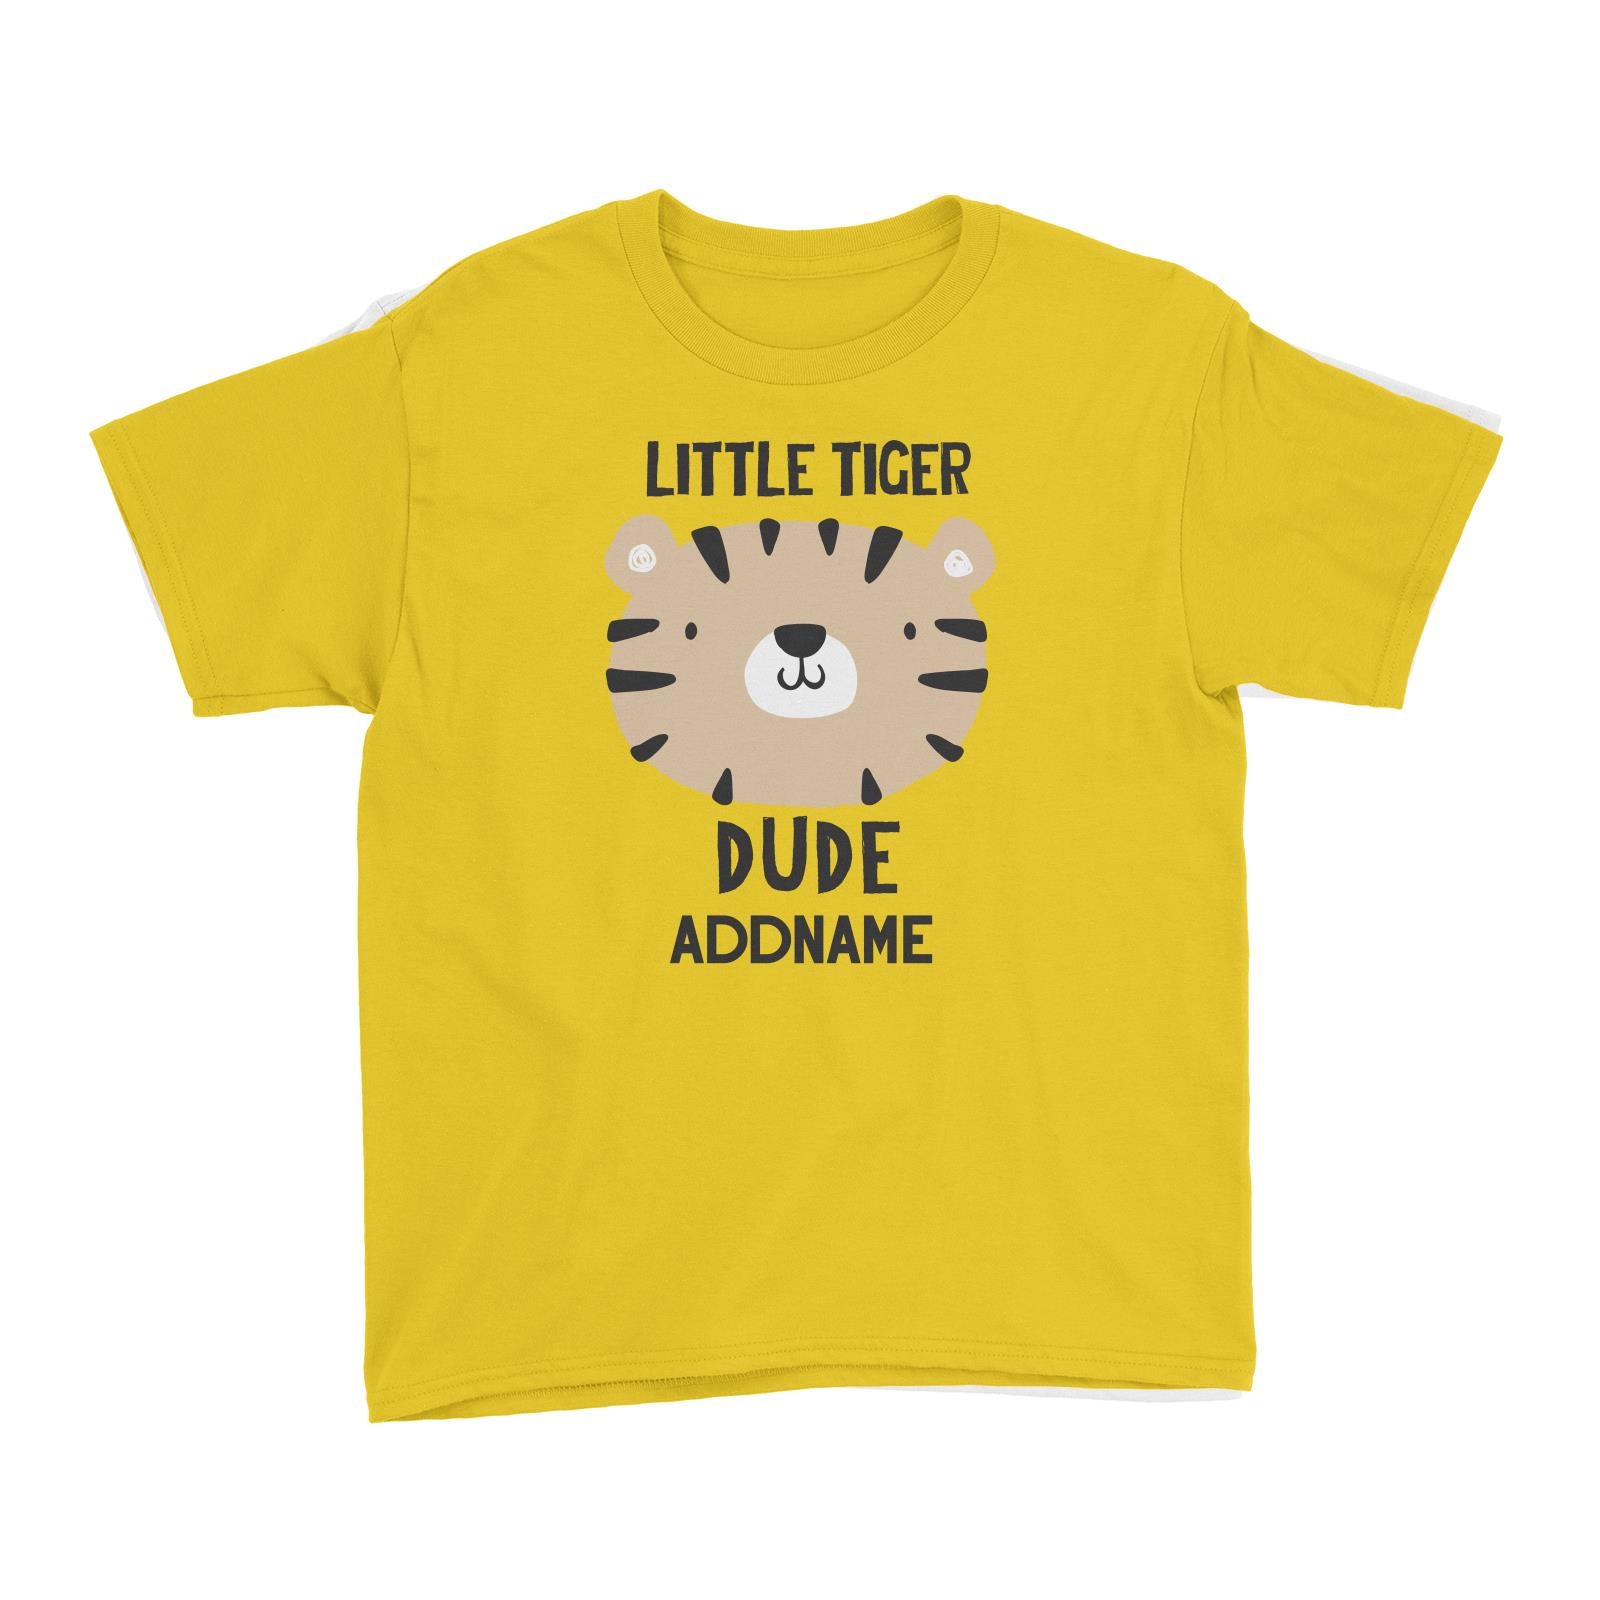 Little Tiger Dude Addname Kid's T-Shirt